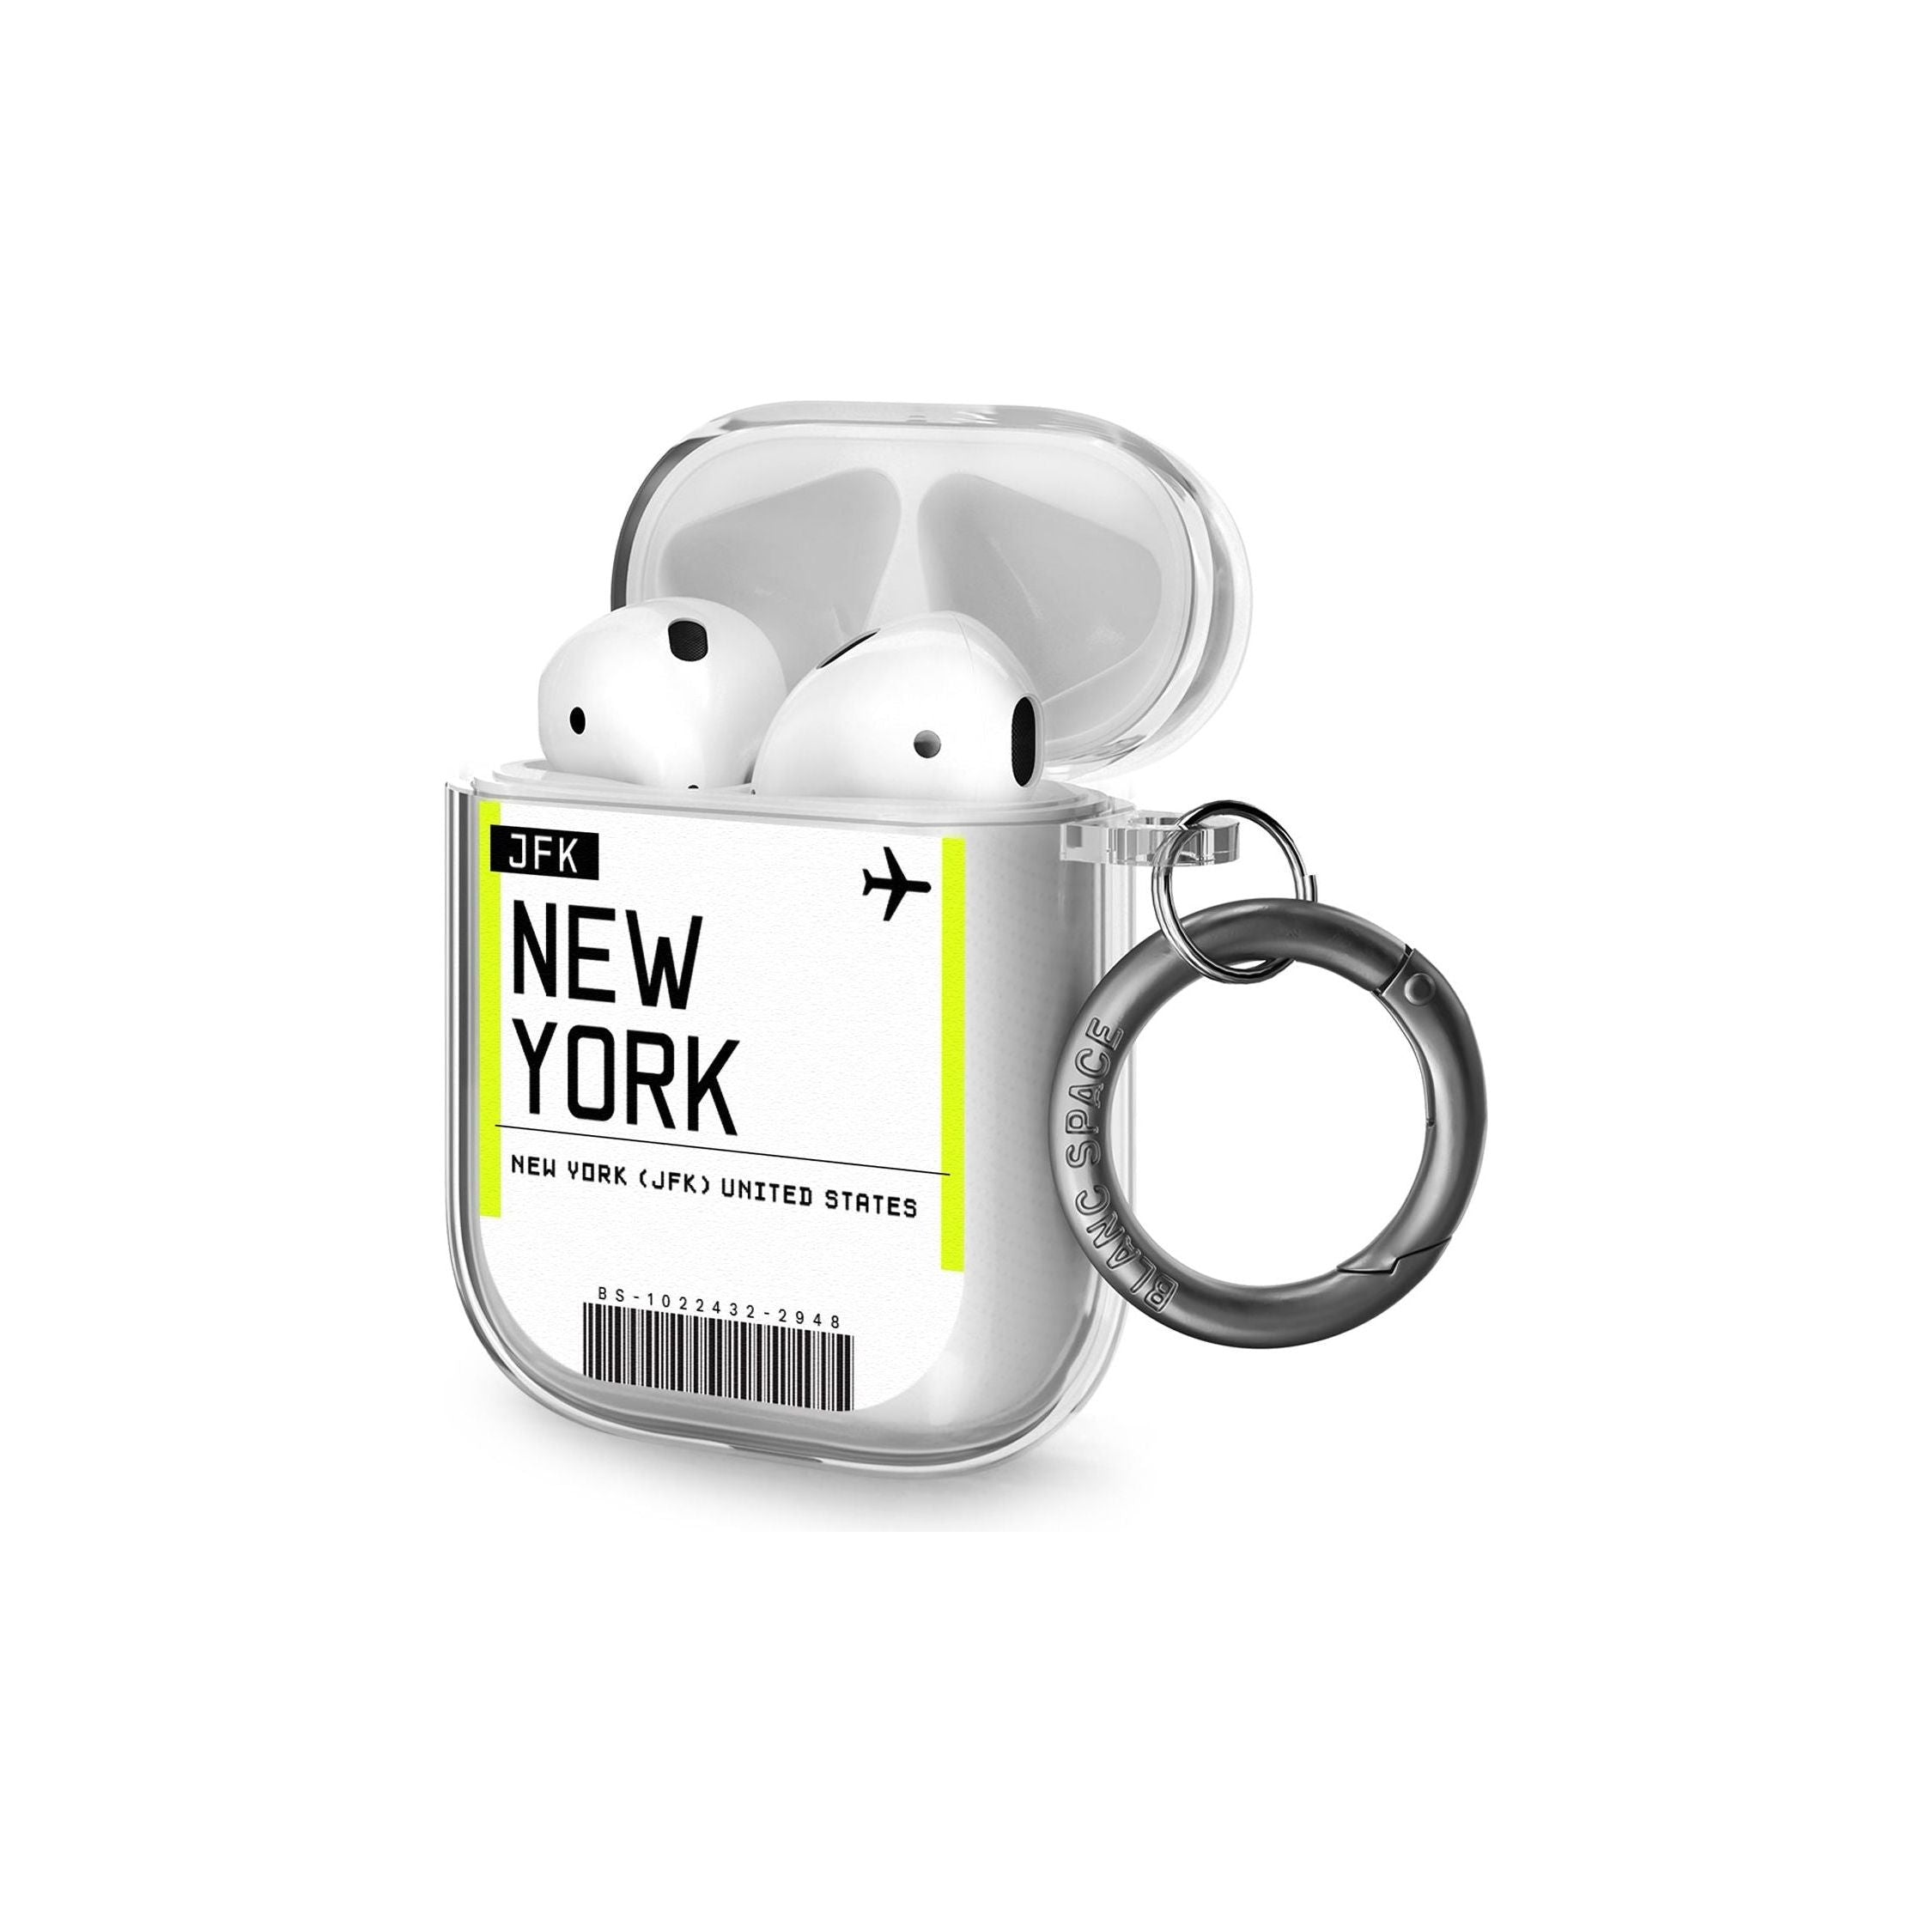 New York Boarding Pass Airpods Case (2nd Generation)